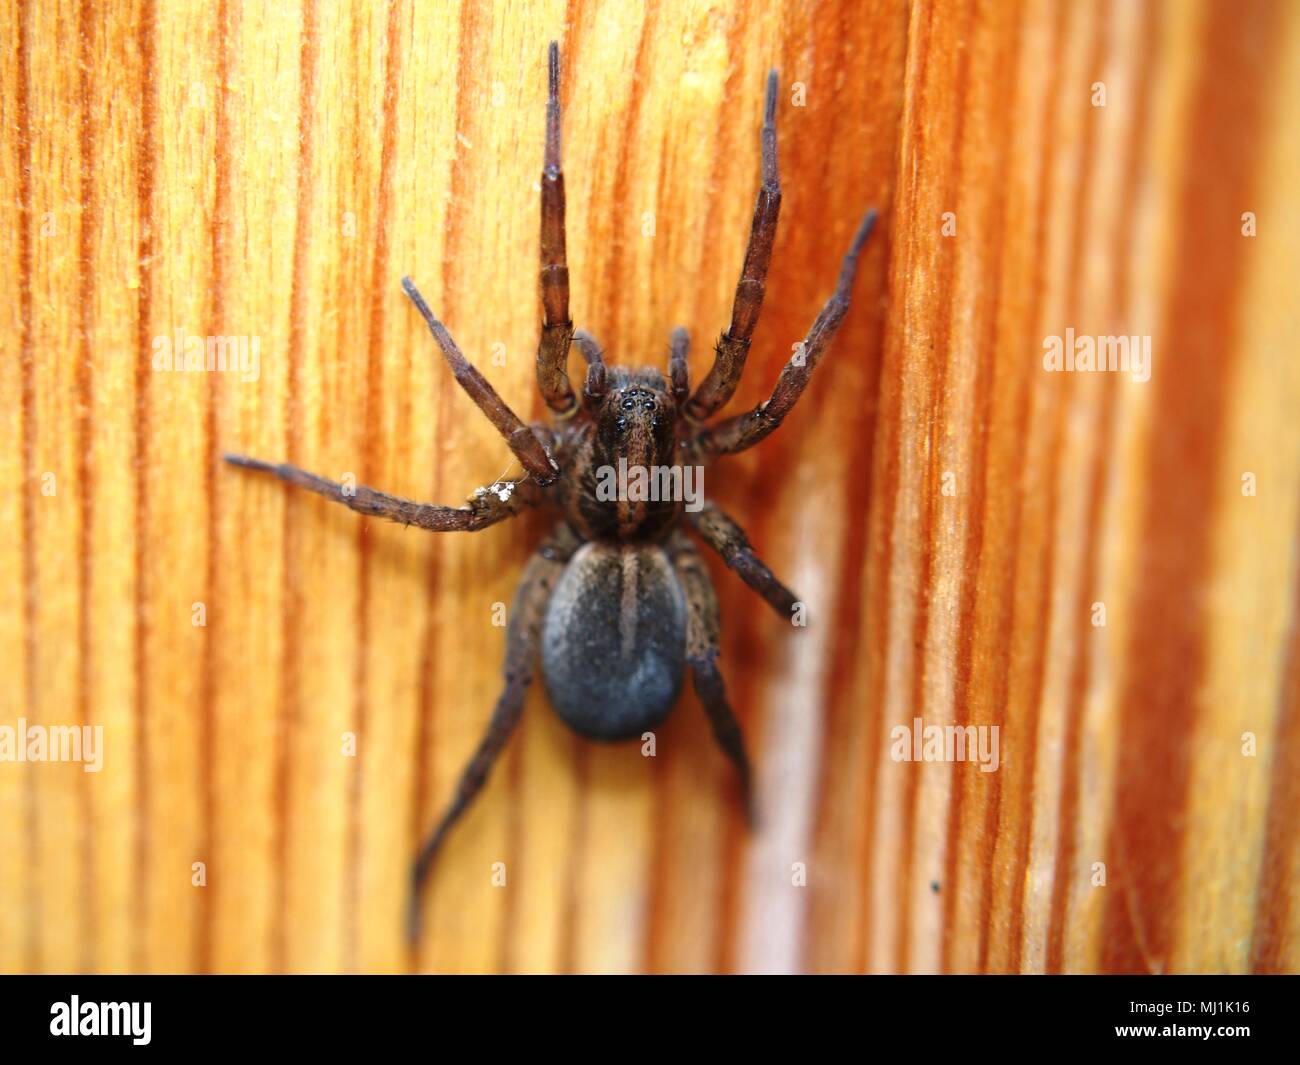 Black spider sits on a wooden surface. Arthropod. Macro mode. Stock Photo